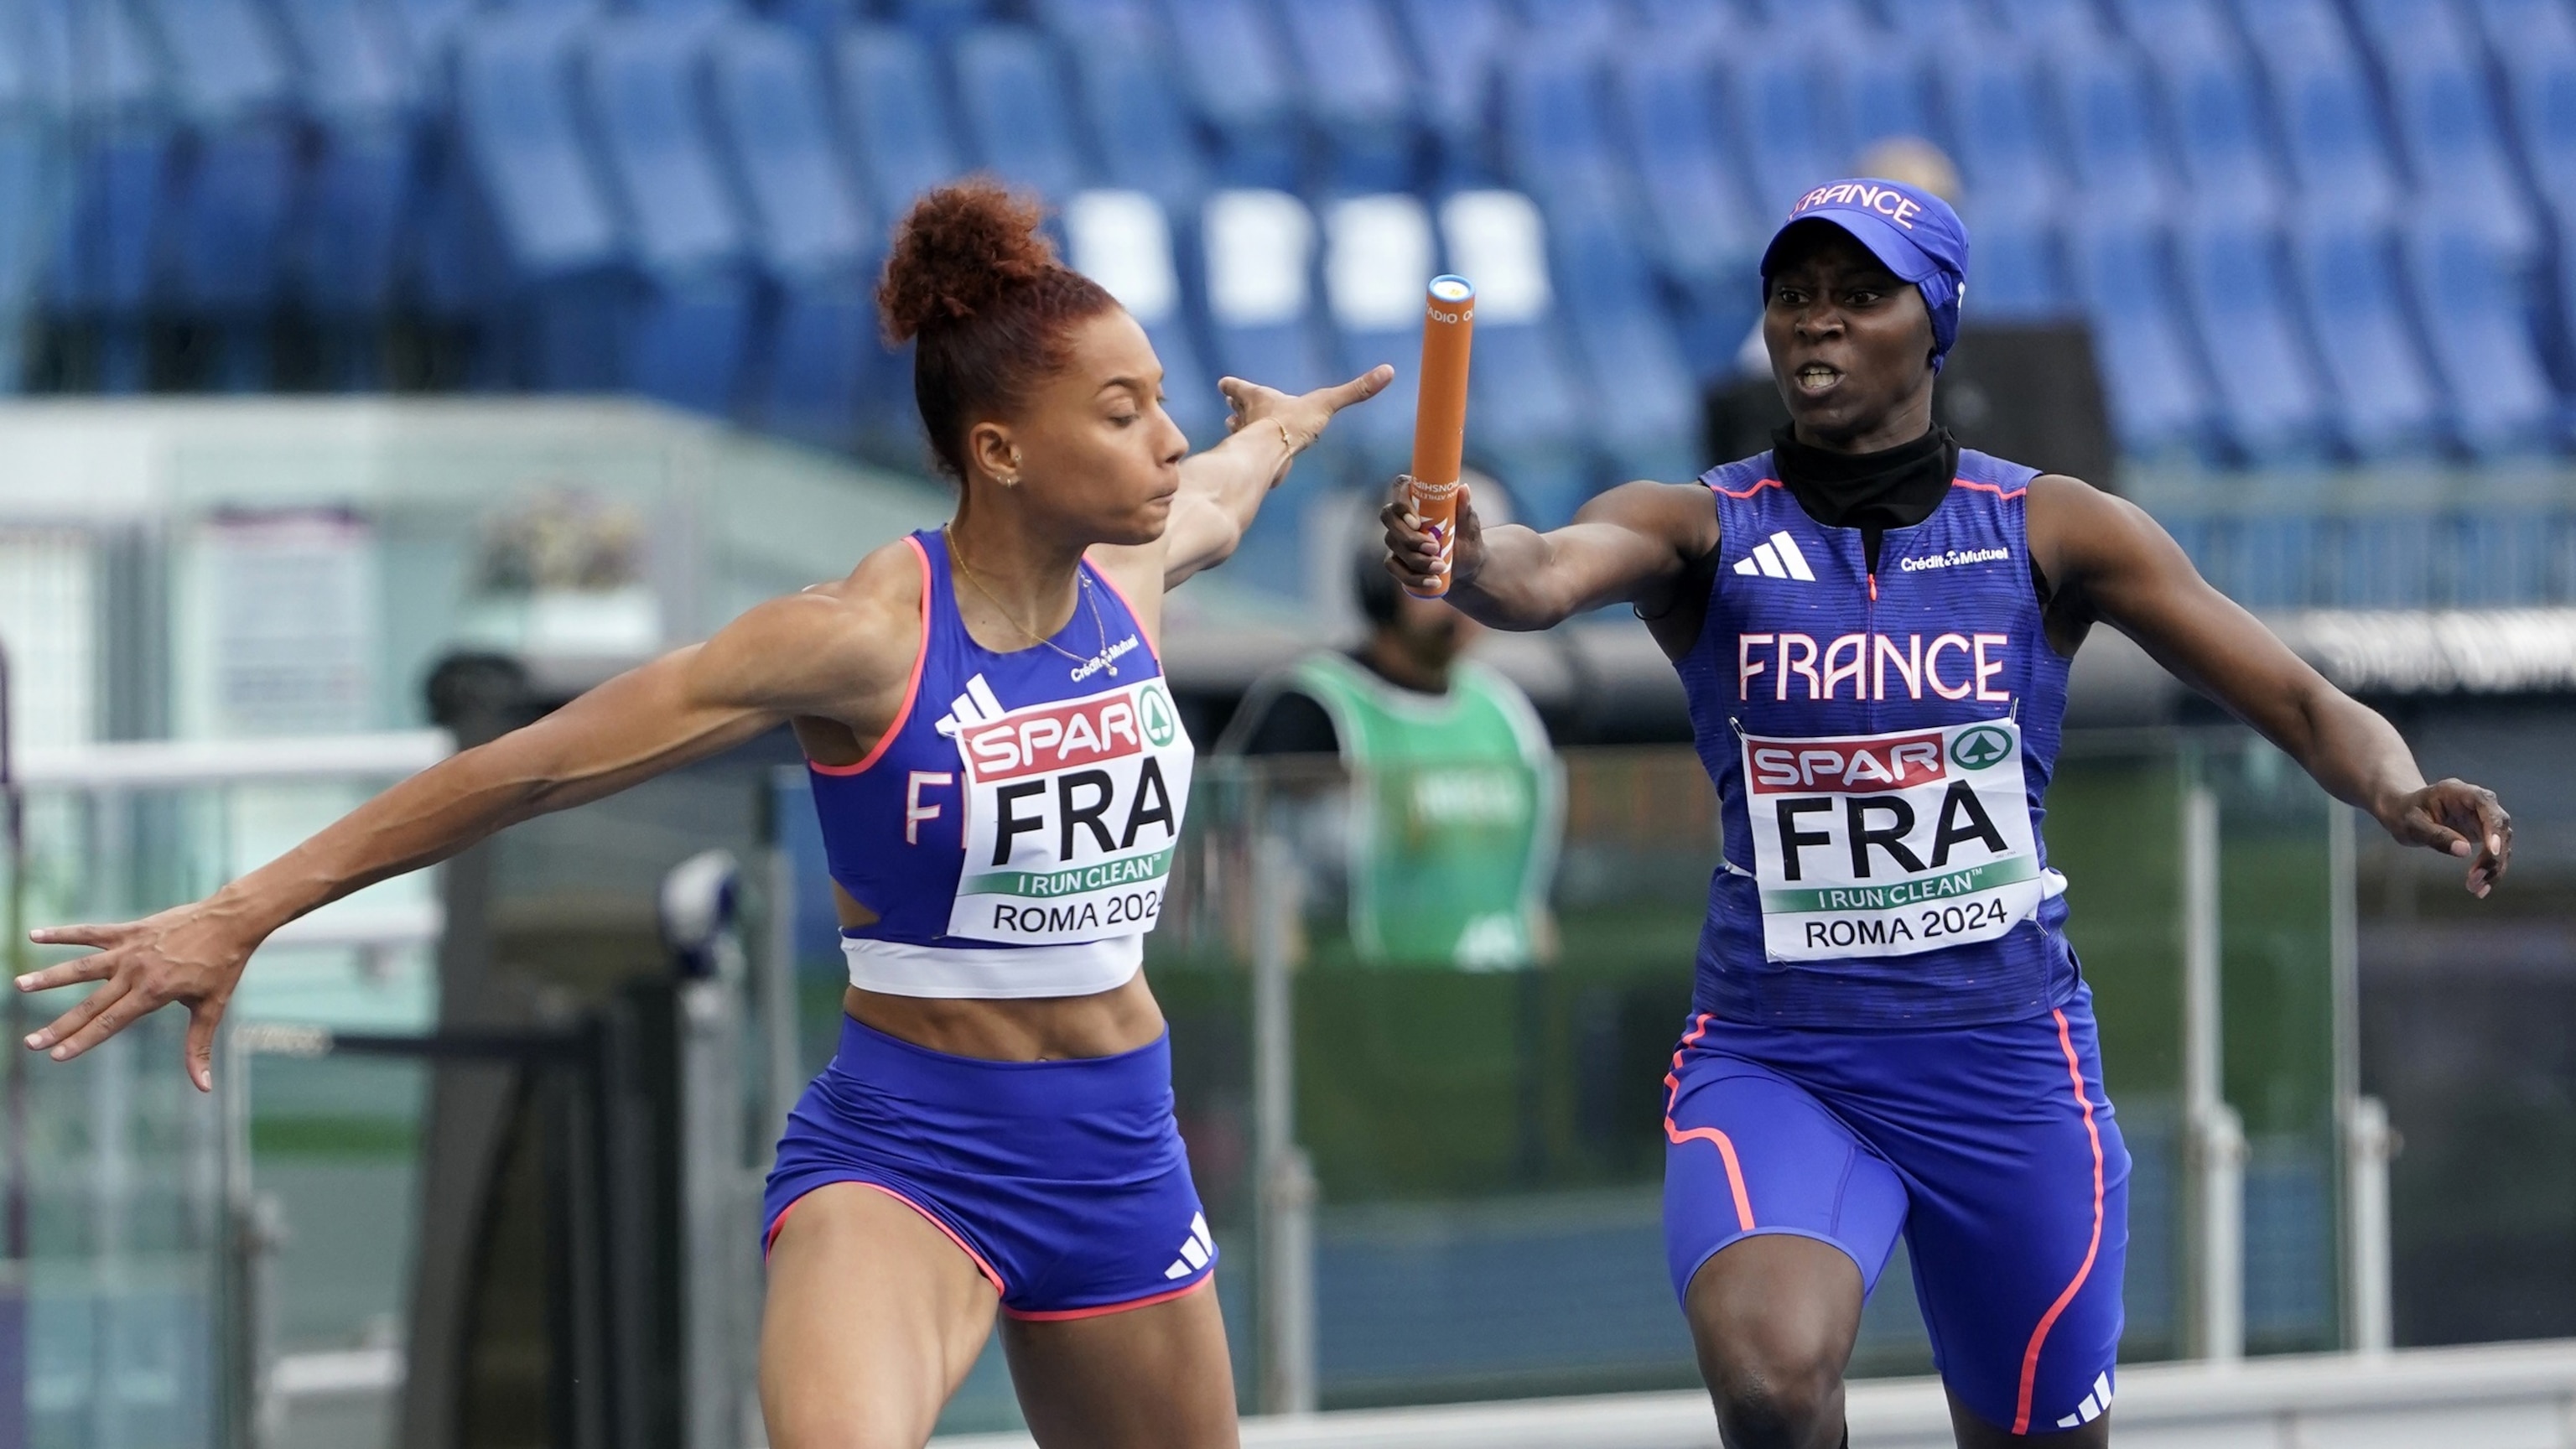 PHOTO: Sylla Sounkamba of team France handing her baton to Alexe Deau of the team France competing o 4 x 400m Relay Women during day five of the 26th European Athletics Championships - Rome 2024, June 11, 2024, in Rome.